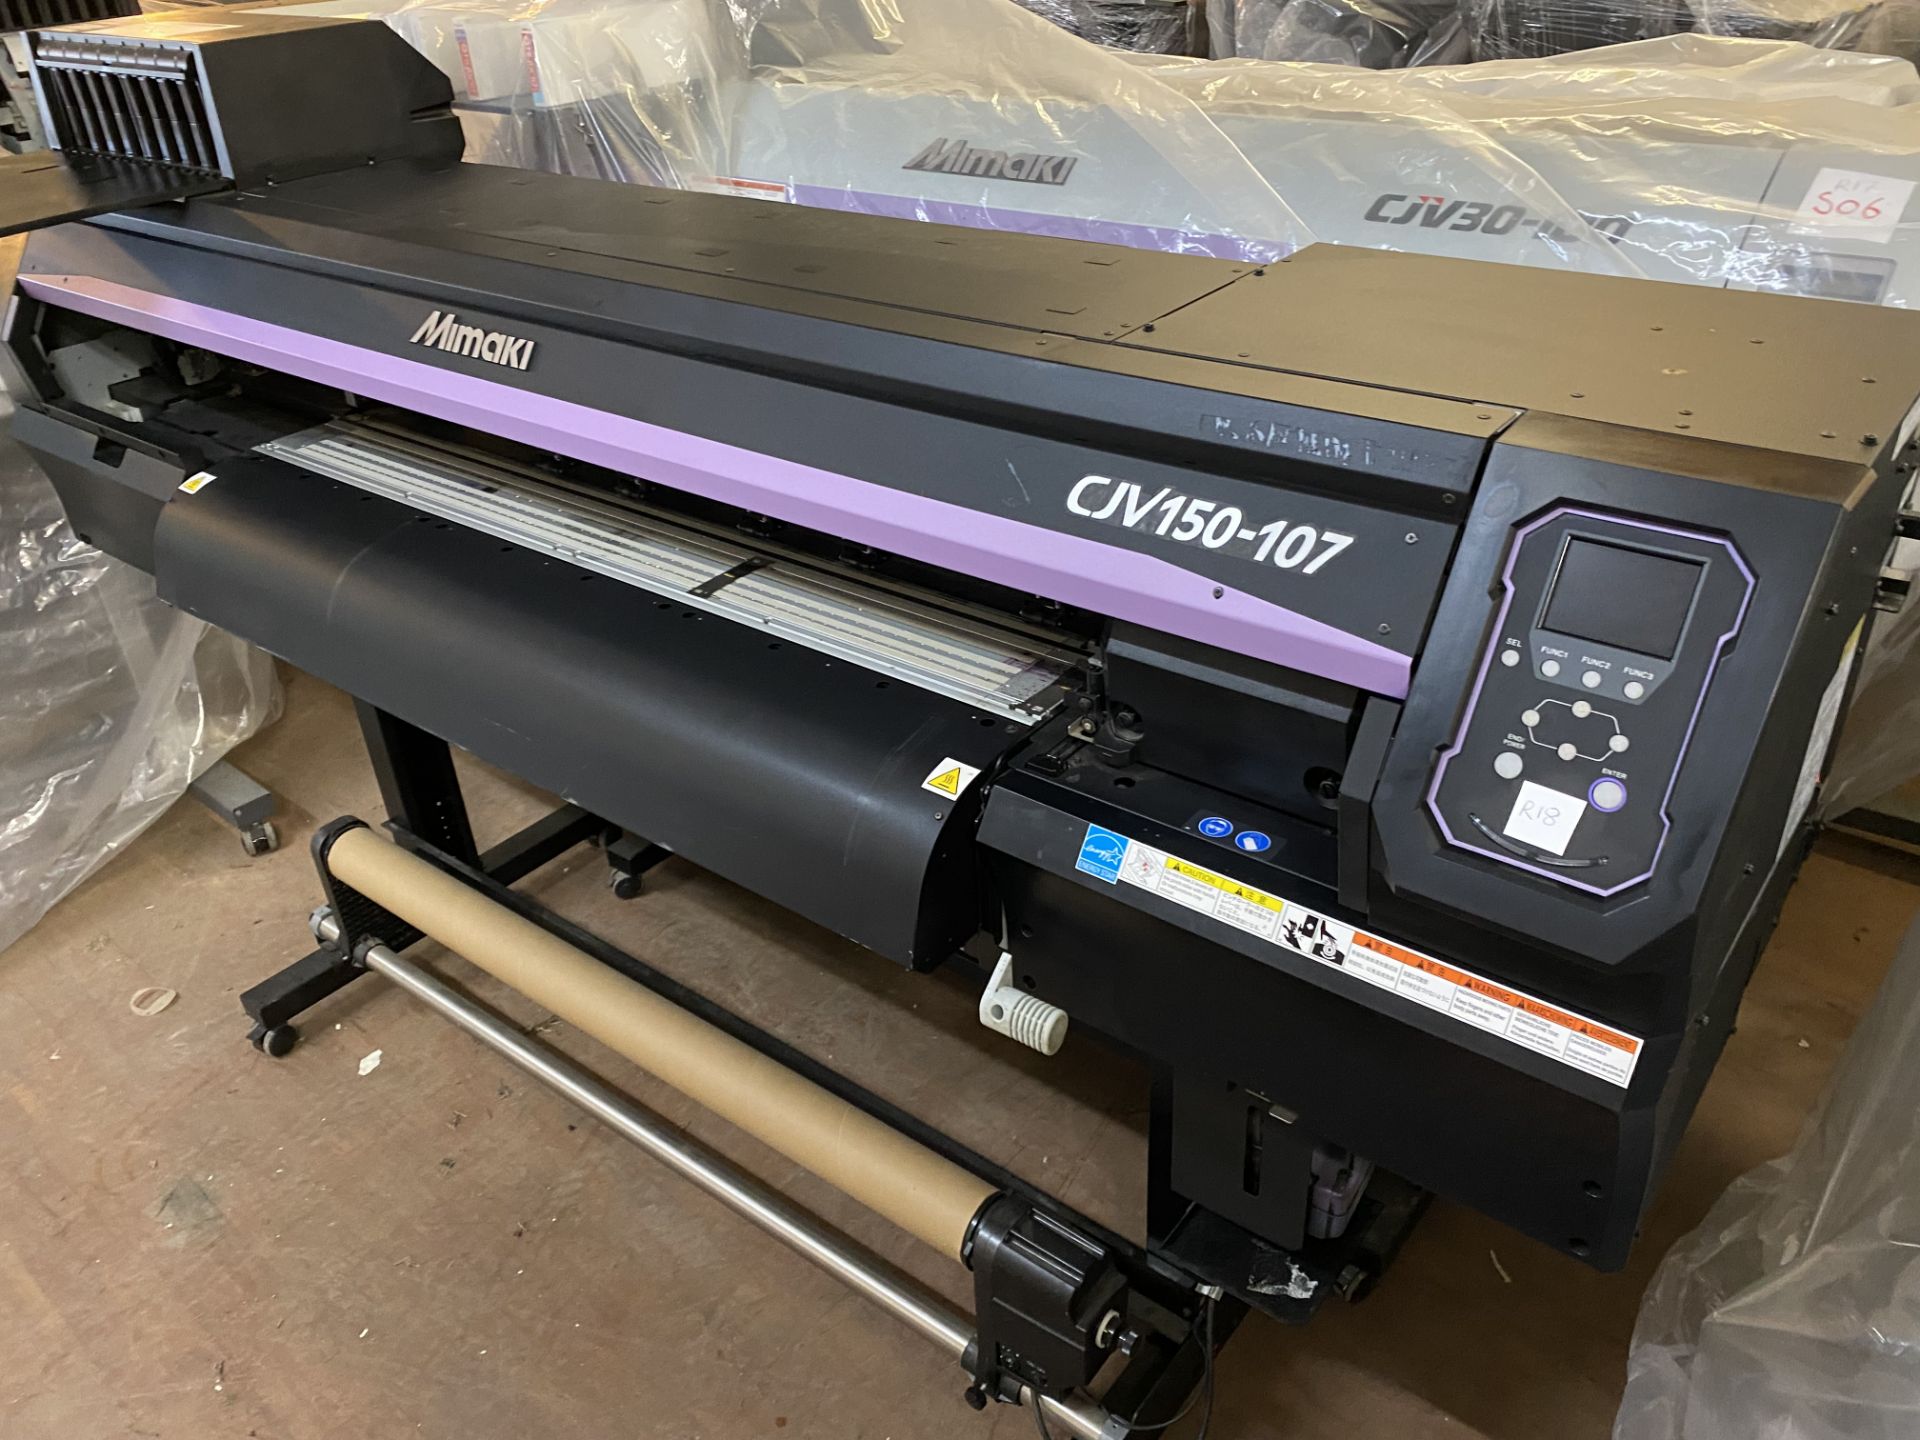 MIMAKI CJV 150-107 ECO SOLVENT PRINT AND CUT LARGE FORMAT PRINTER (R18) - Image 2 of 3